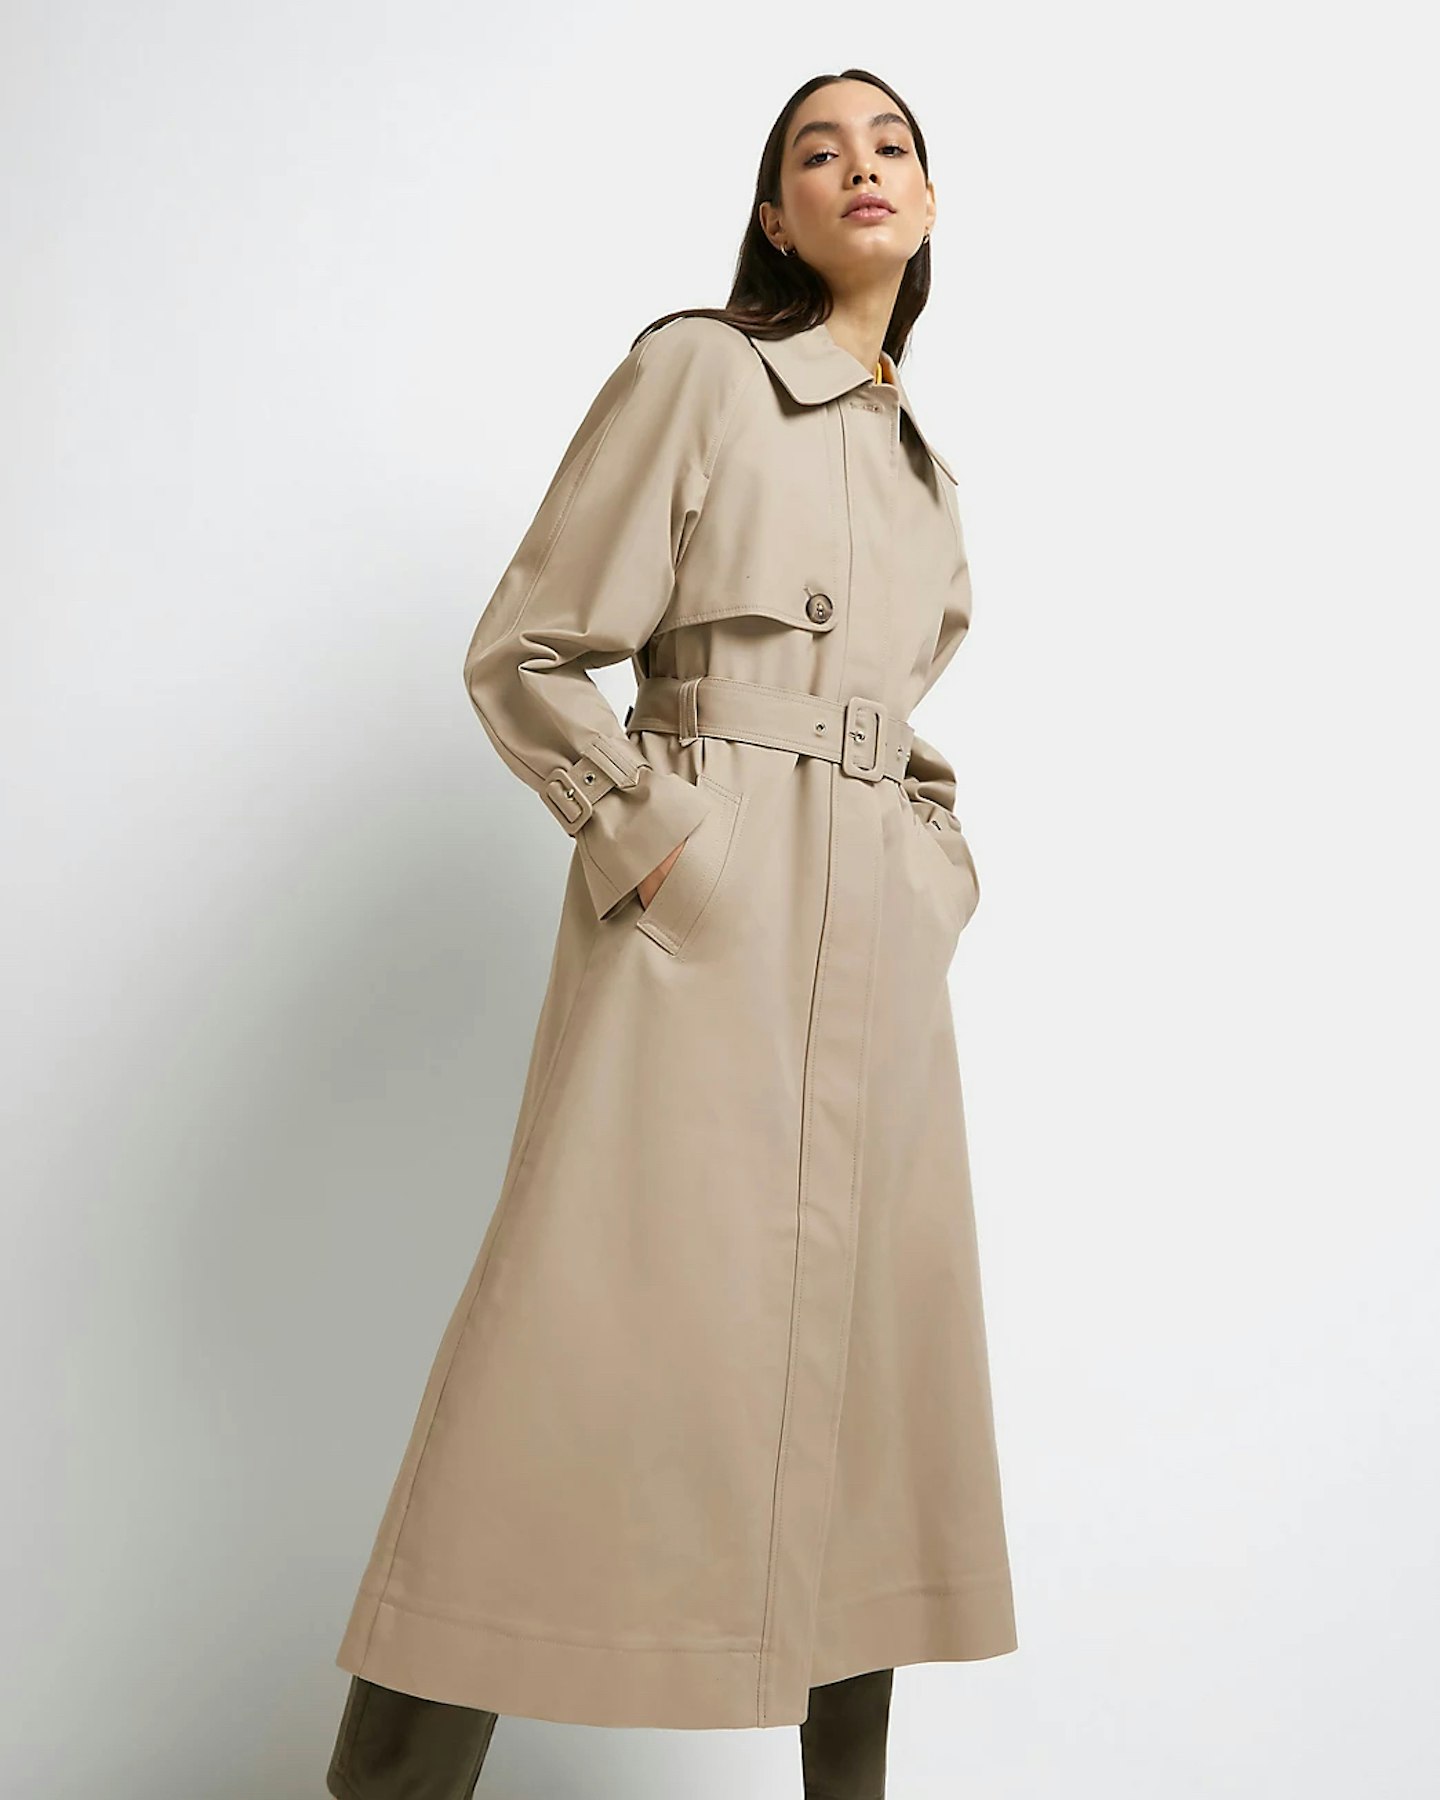 Lunchtime shop Monday - River Island, Beige Trench Coat, £130